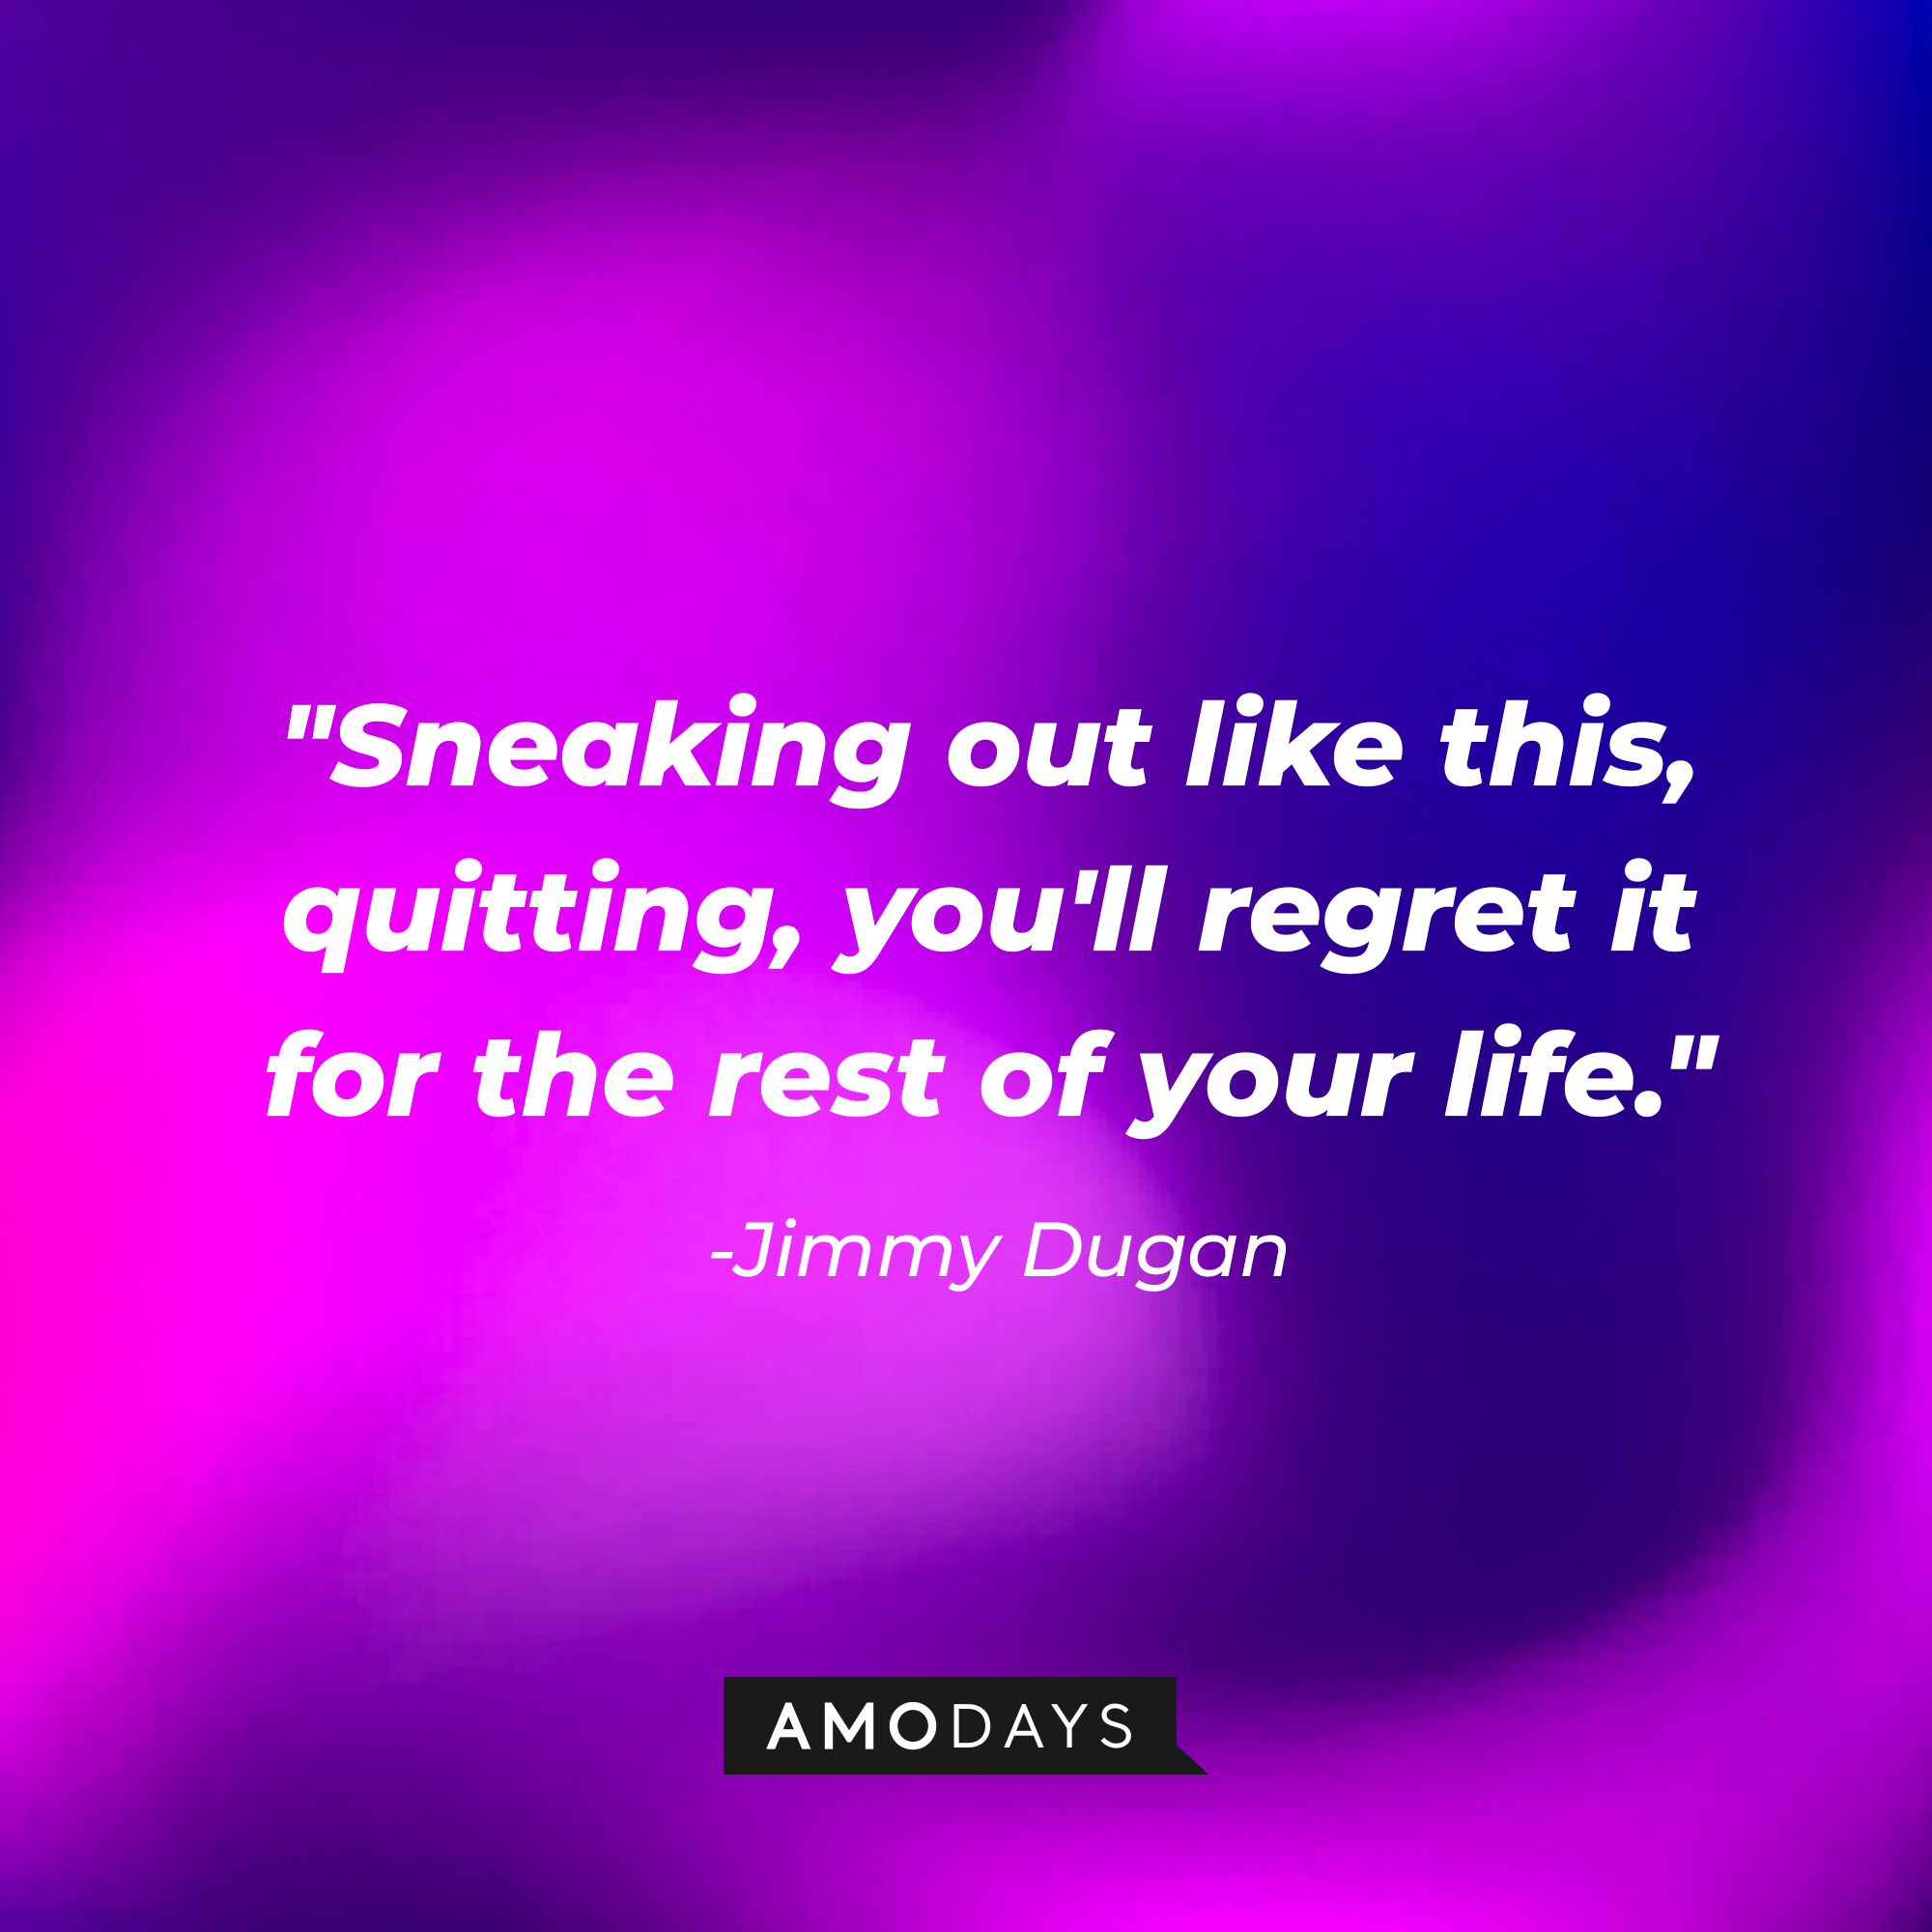 Jimmy Dugan's quote: "Sneaking out like this, quitting, you'll regret it for the rest of your life." | Source: AmoDays